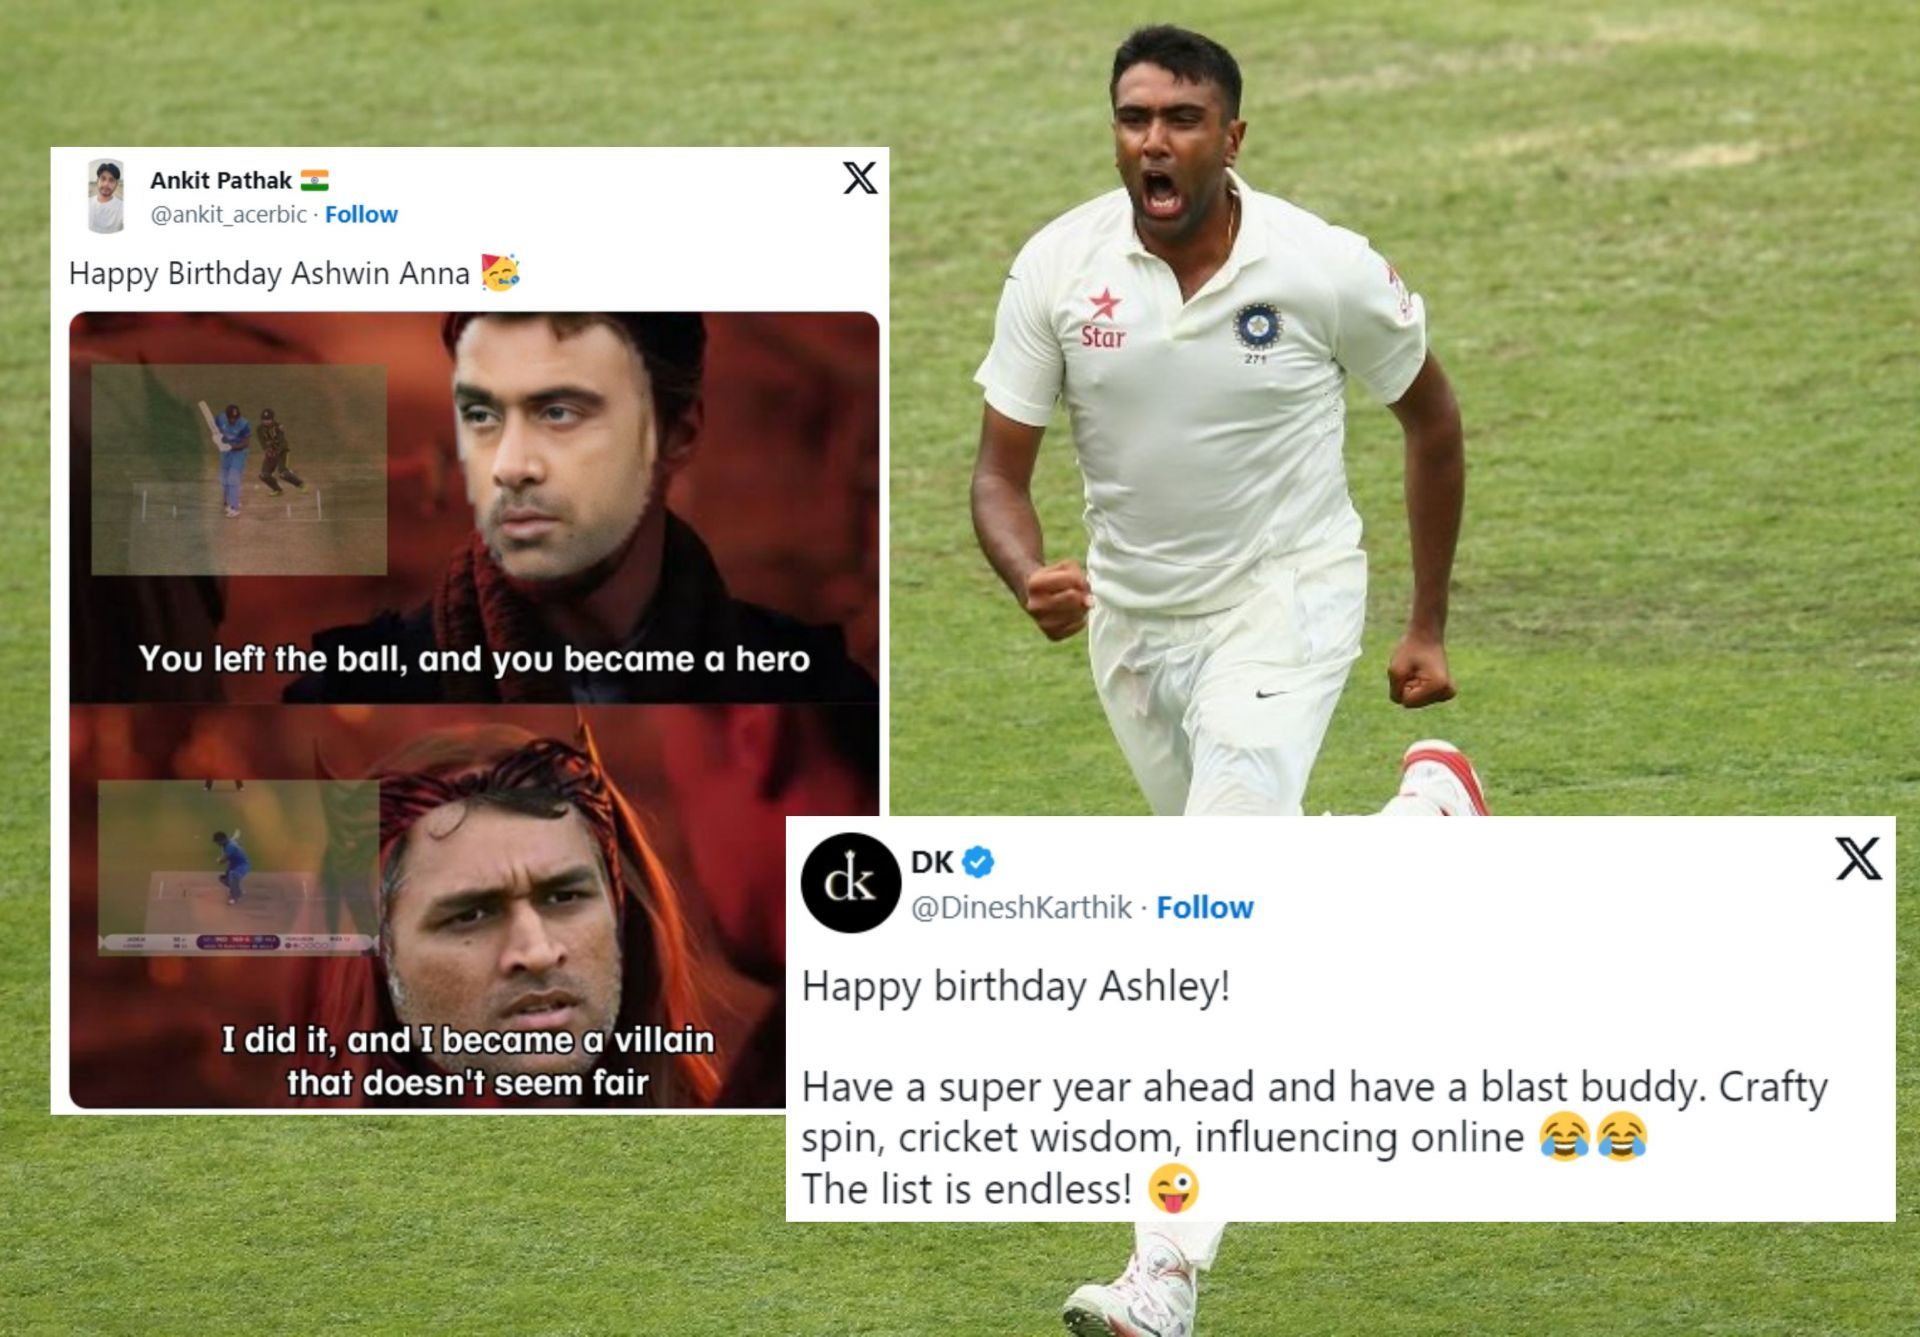 Ravichandran Ashwin receives special wishes as he turned 37 today.